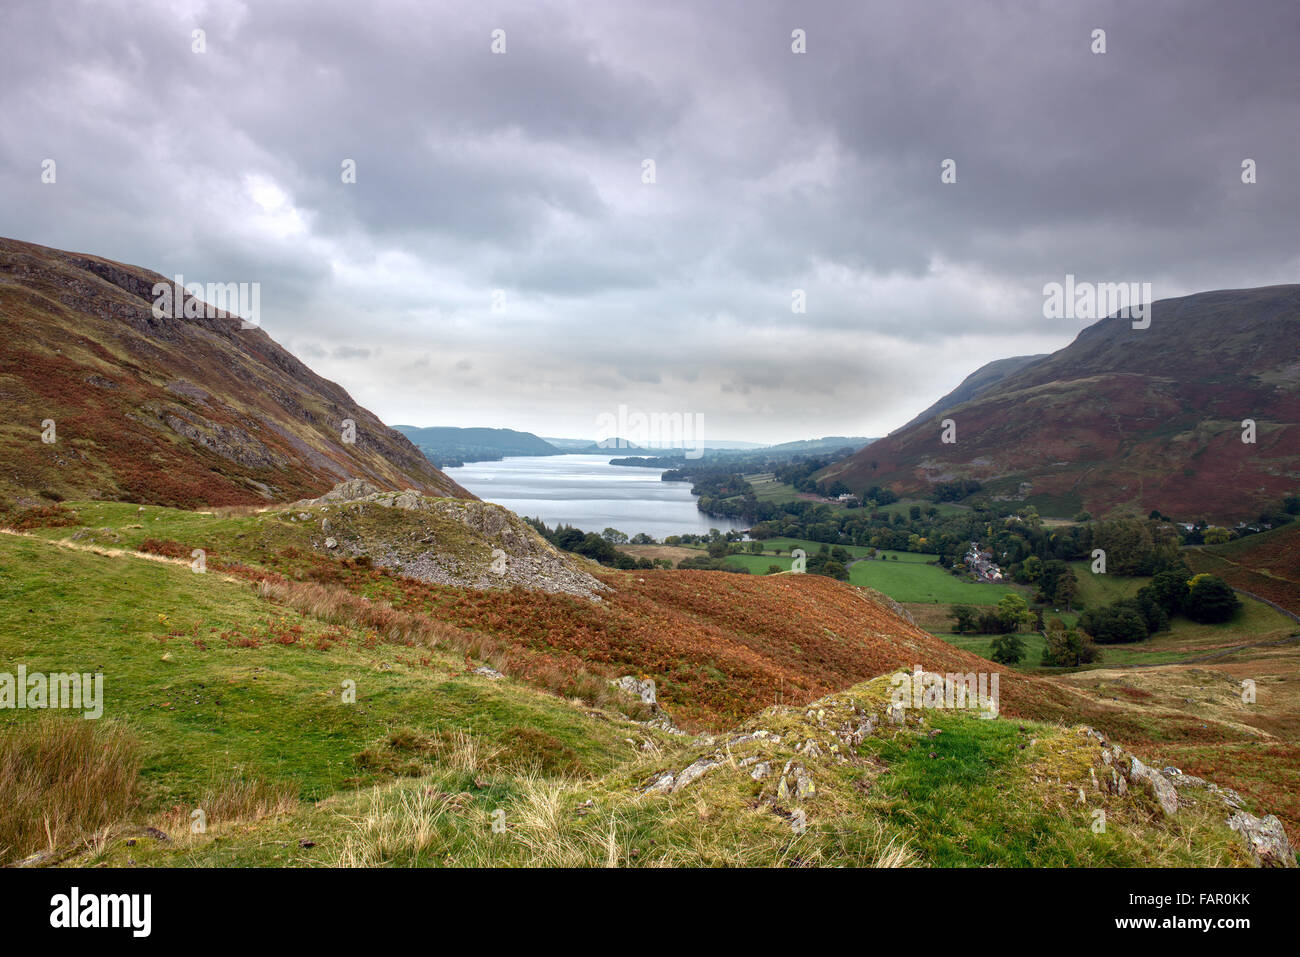 Elevated view of Ullswater from Martindale looking over Hallin Fell, Swarth Fell and Howtown. English Lake District, Cumbria, UK Stock Photo